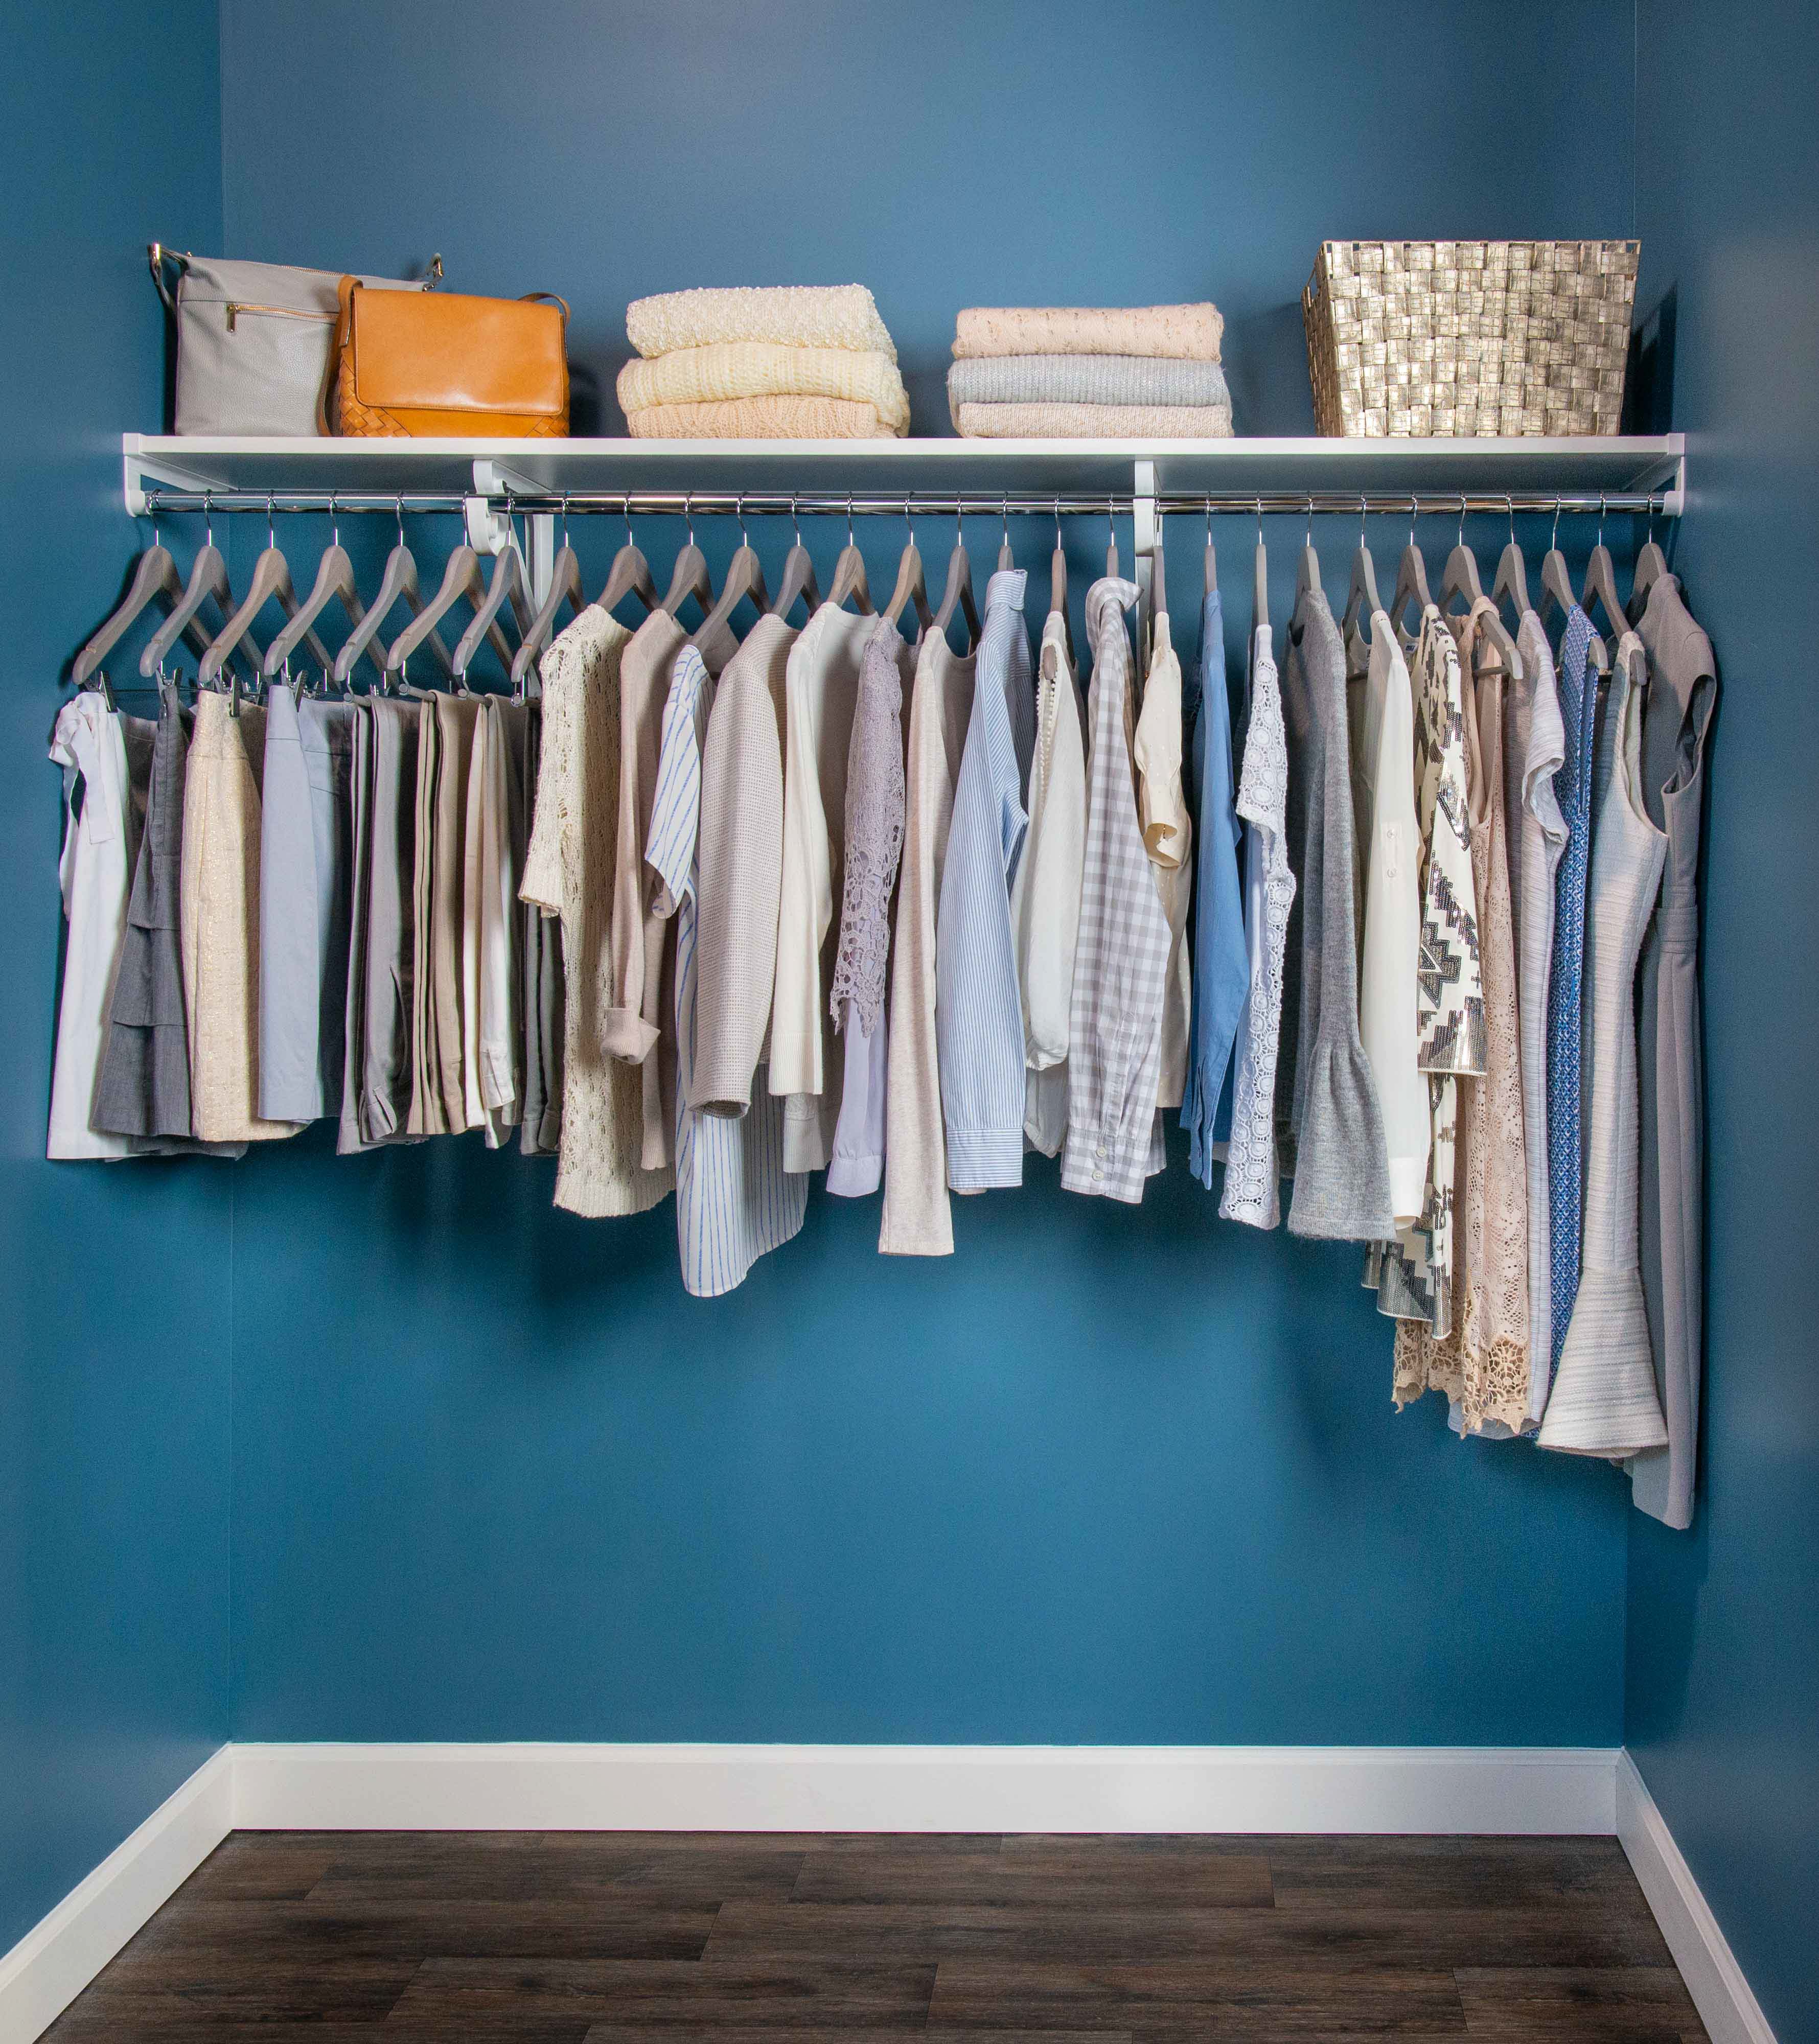 VUE Reach-In Closet in White with hanging clothes, basket and blue wall.